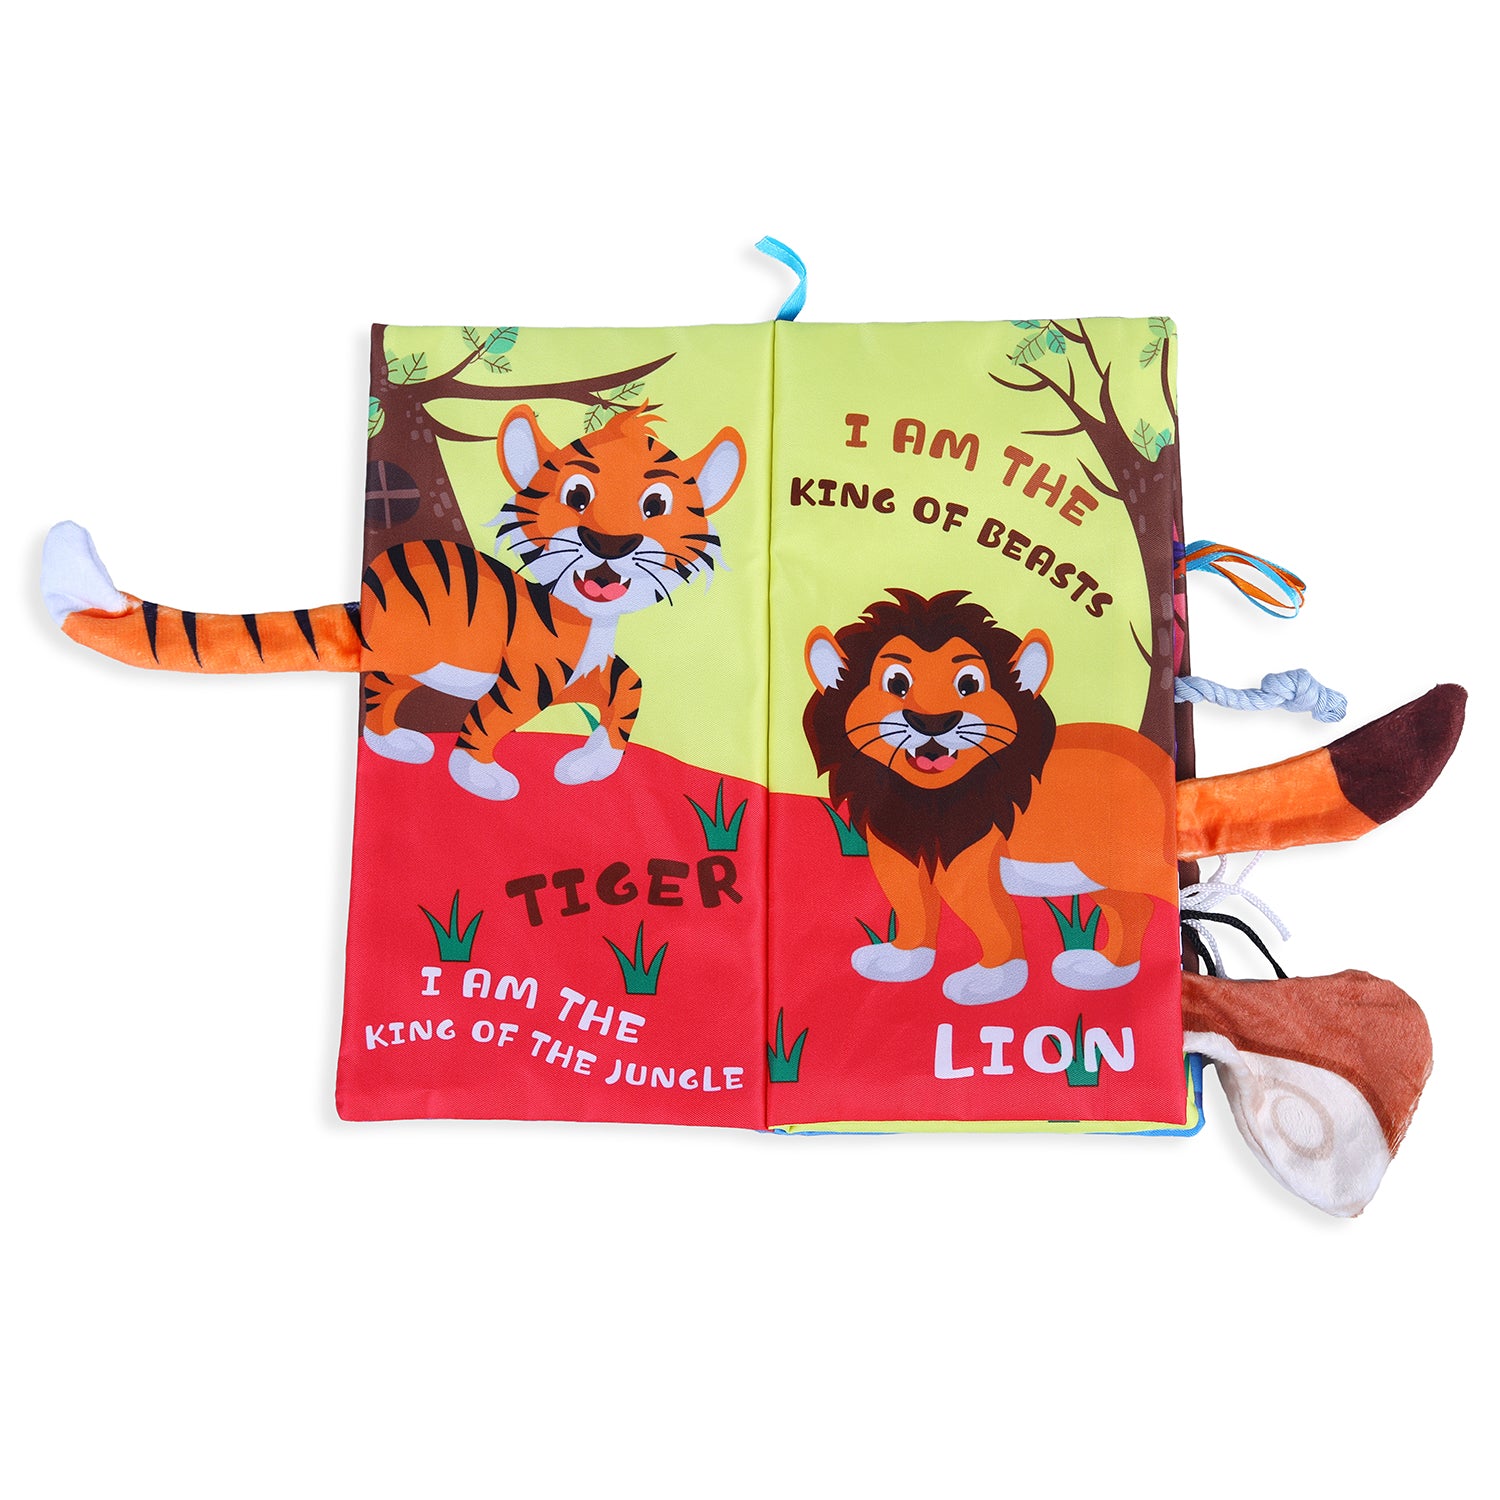 Forest Tail Early Children Sensory Development Interactive 3D Cloth Book With Rustle Paper - Multicolour - Baby Moo